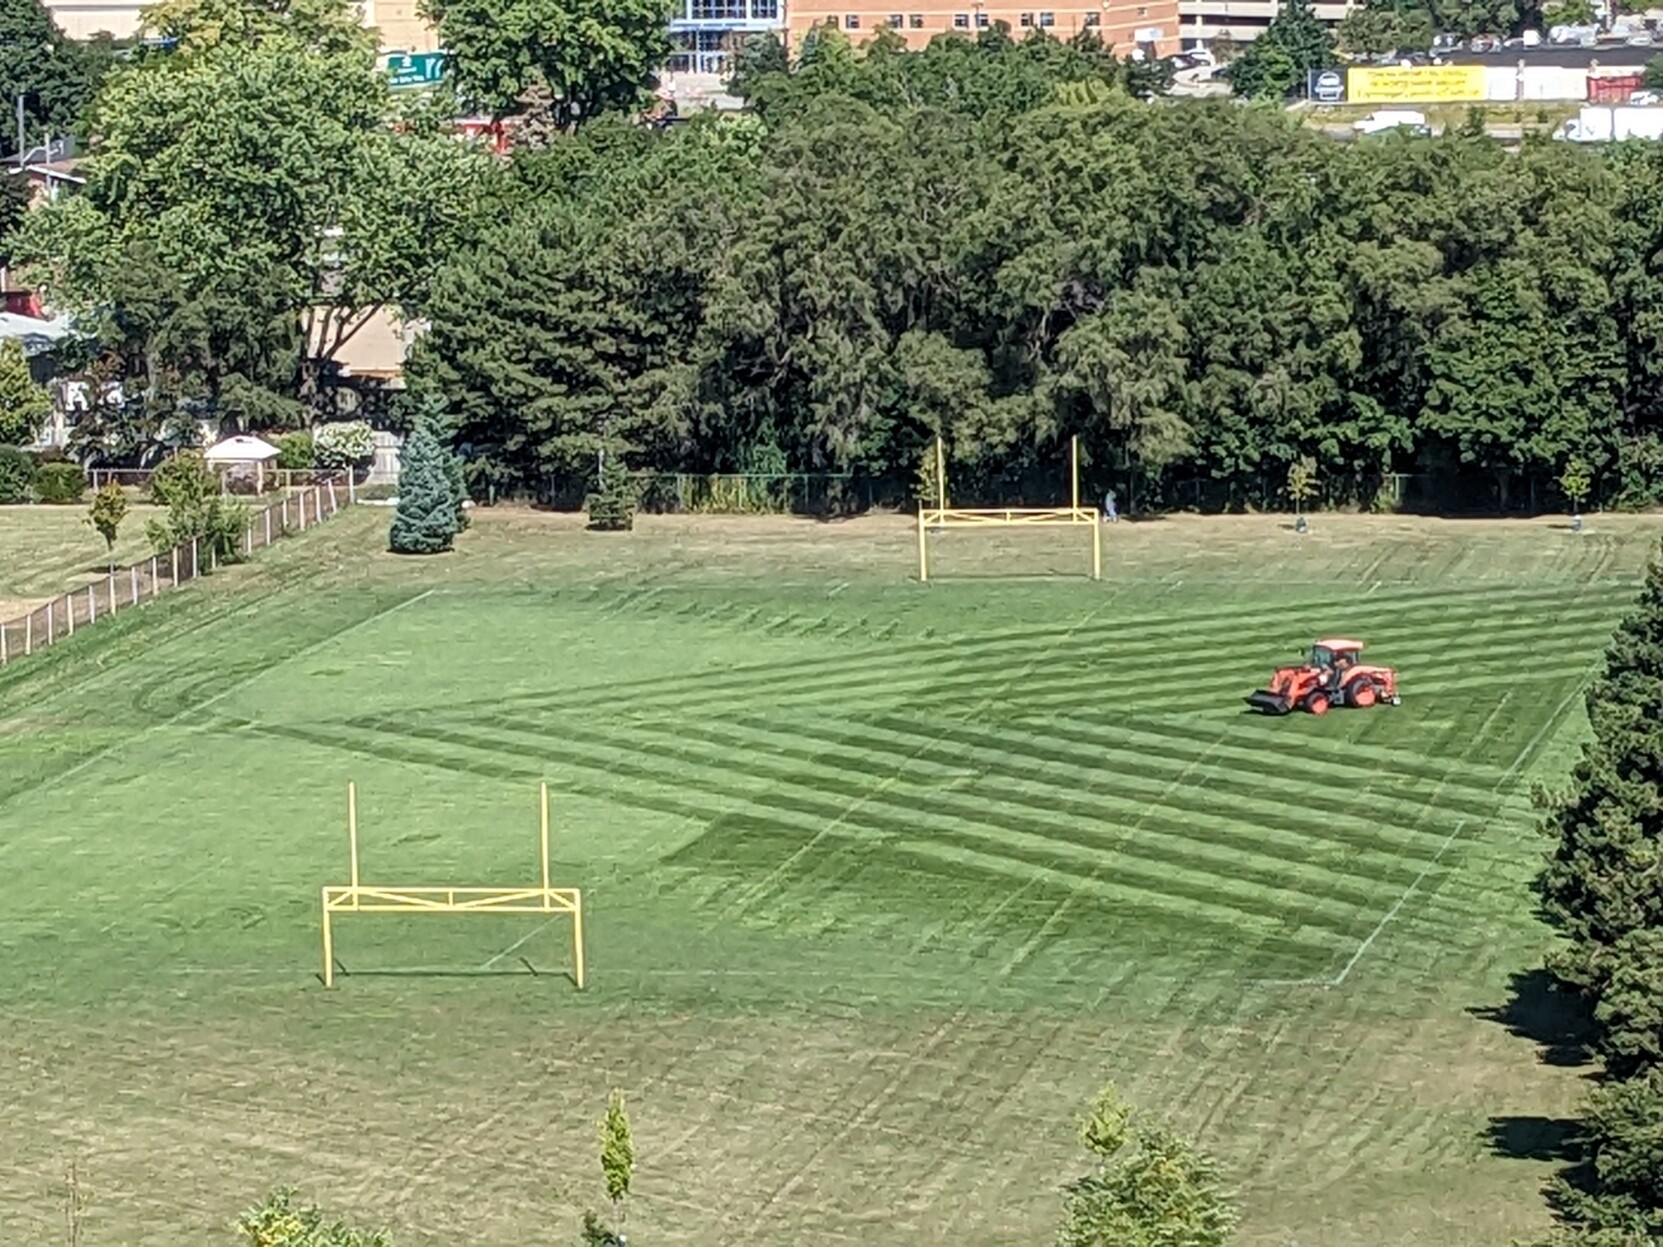 Tractor cutting grass on a soccer field in a triangular pattern